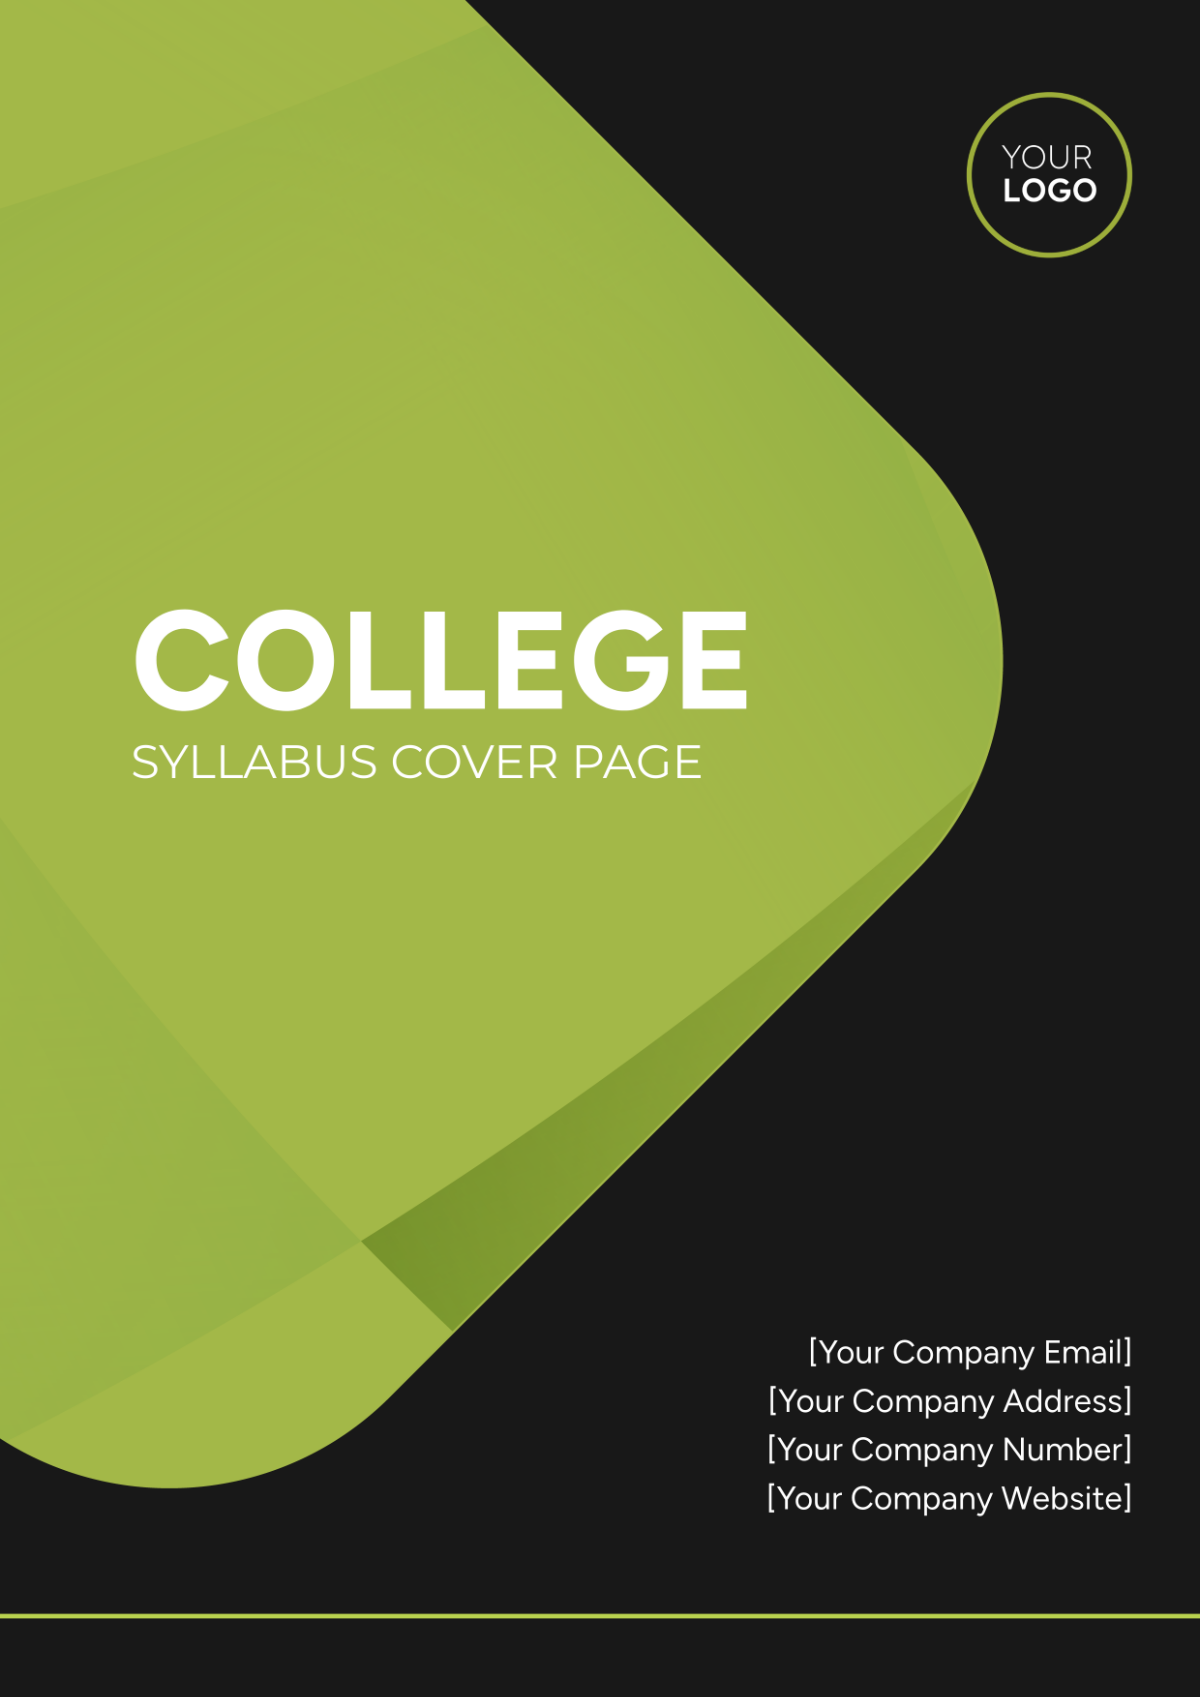 College Syllabus Cover Page